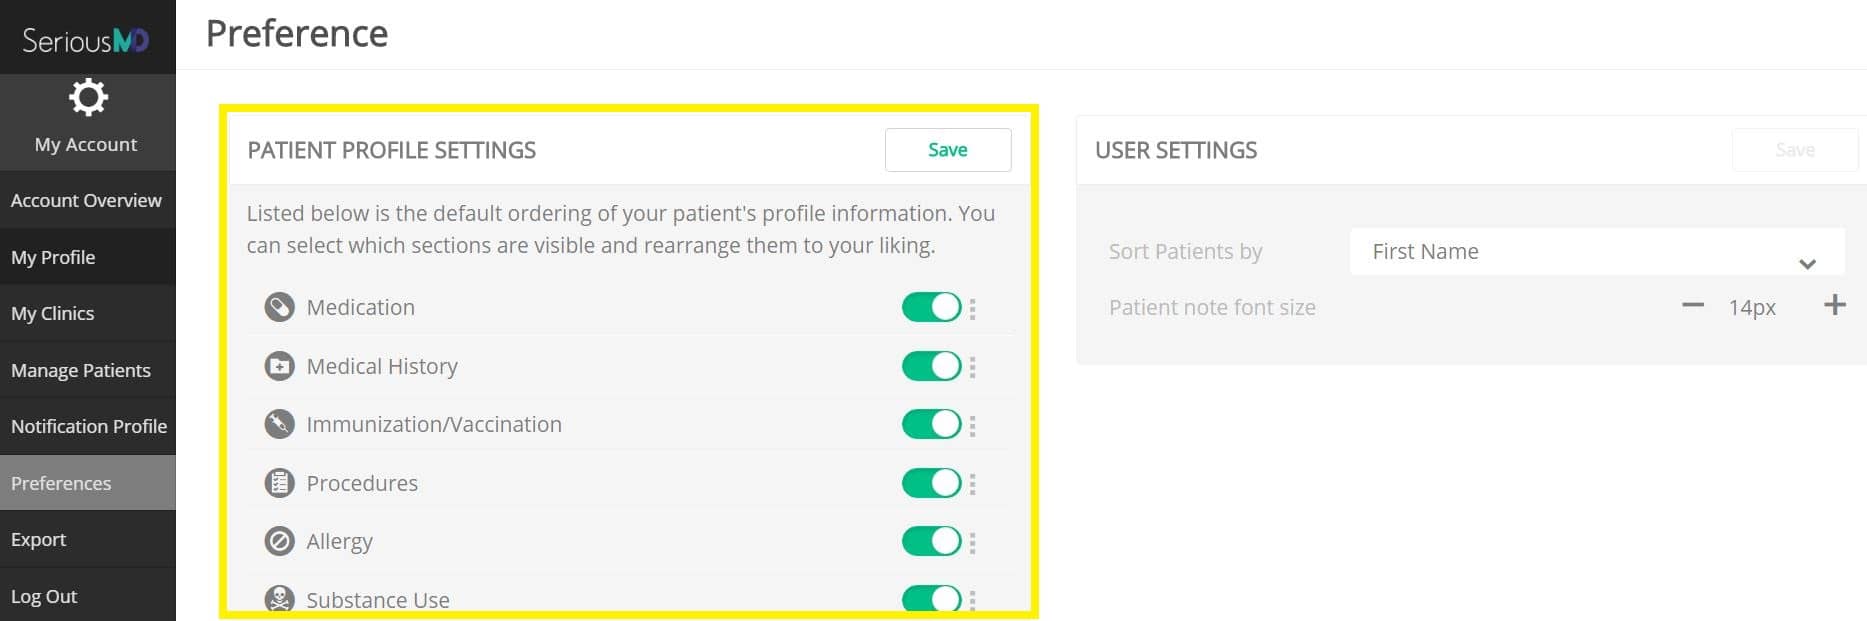 SeriousMD Preferences patient profile settings